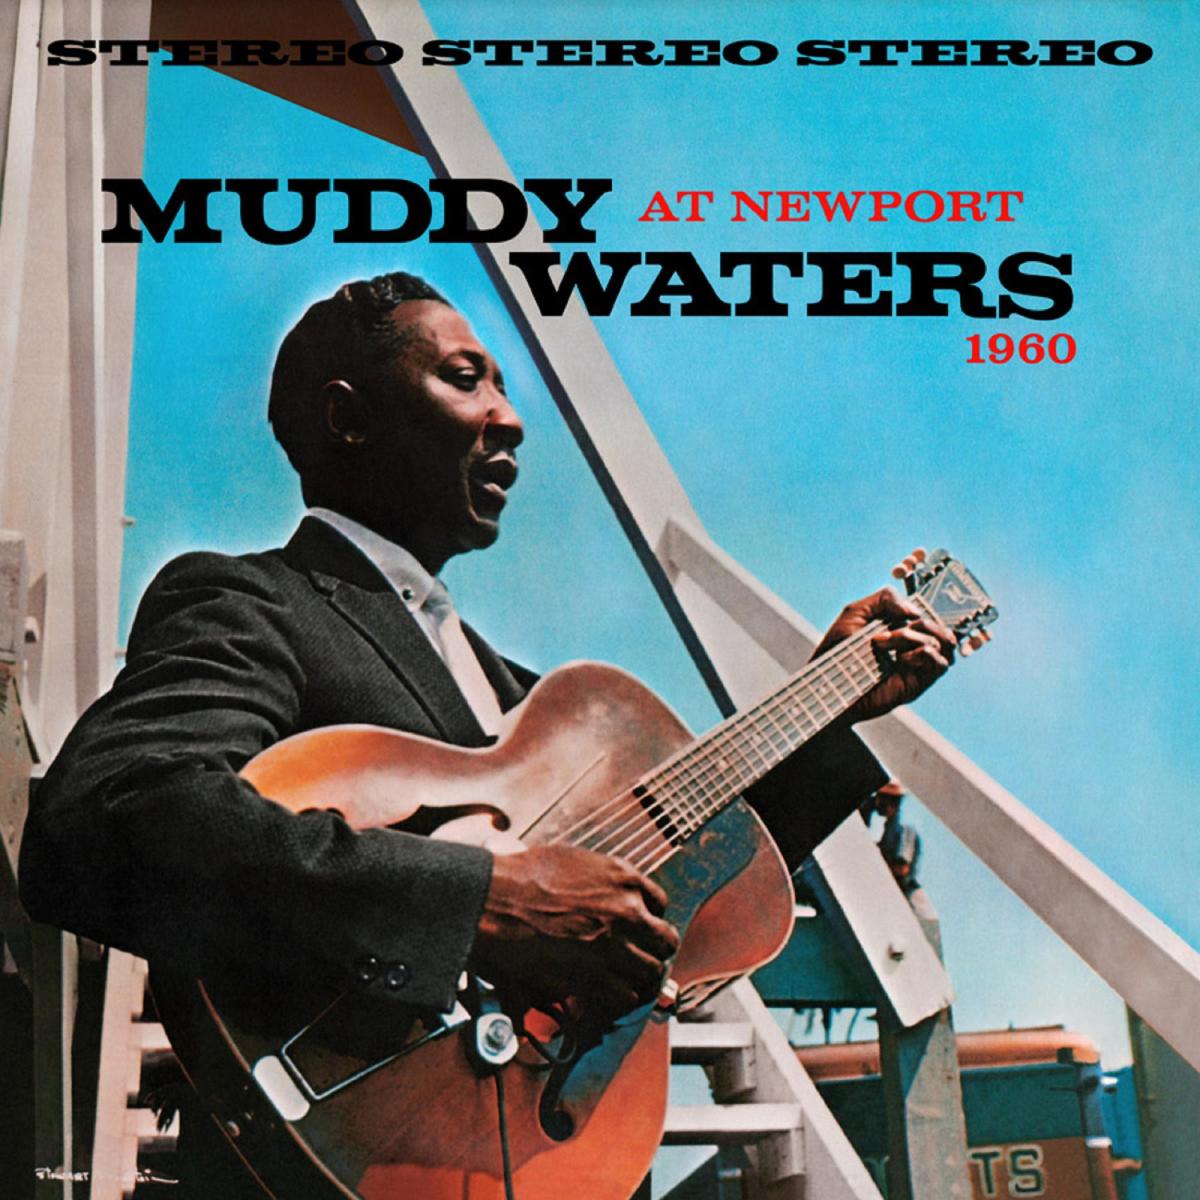 Muddy Waters performed "Got My Mojo Working" in two parts At Newport in 1960